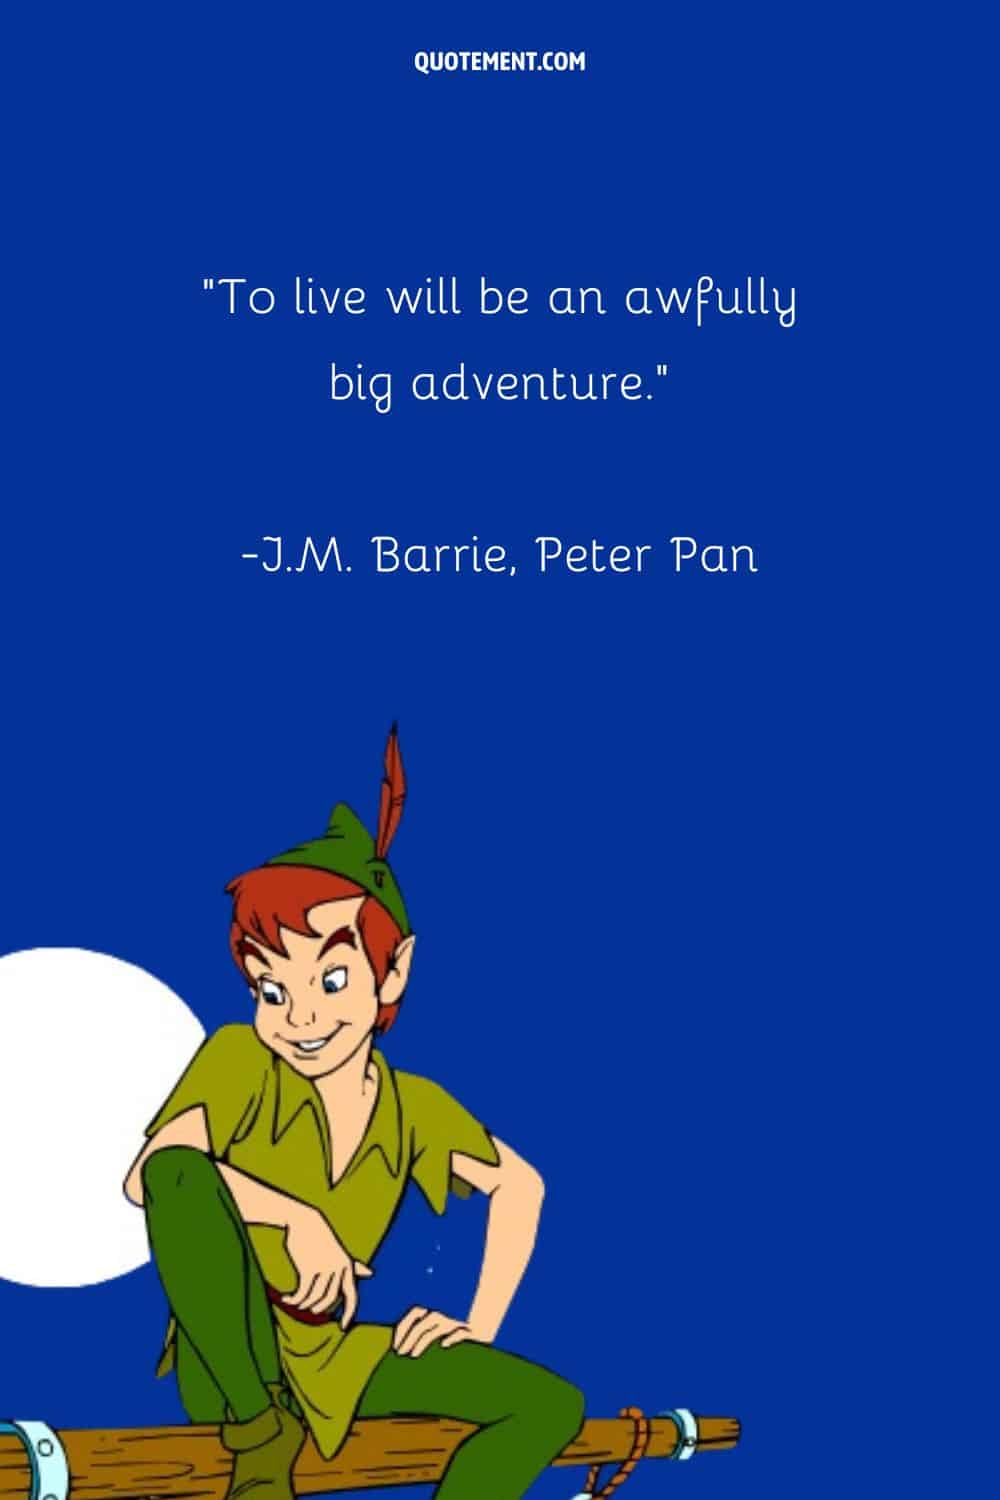 “To live will be an awfully big adventure.” ― J.M. Barrie, Peter Pan